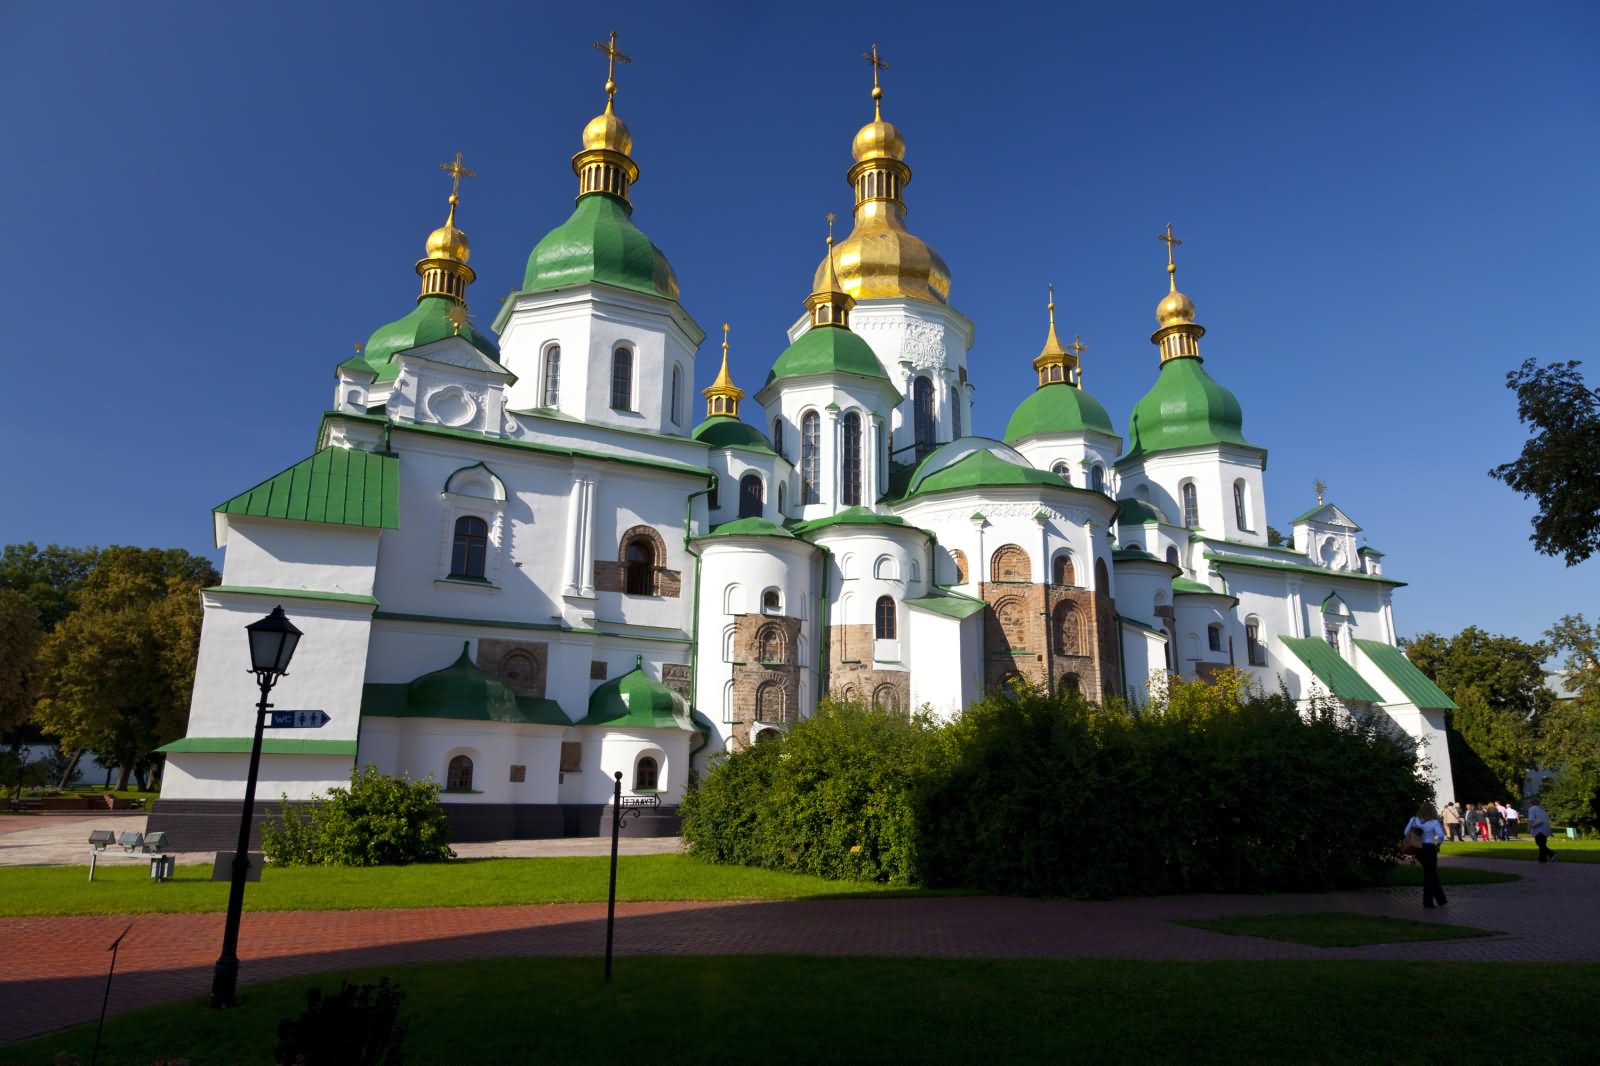 Side View Image Of The Saint Sophia Cathedral In Kiev